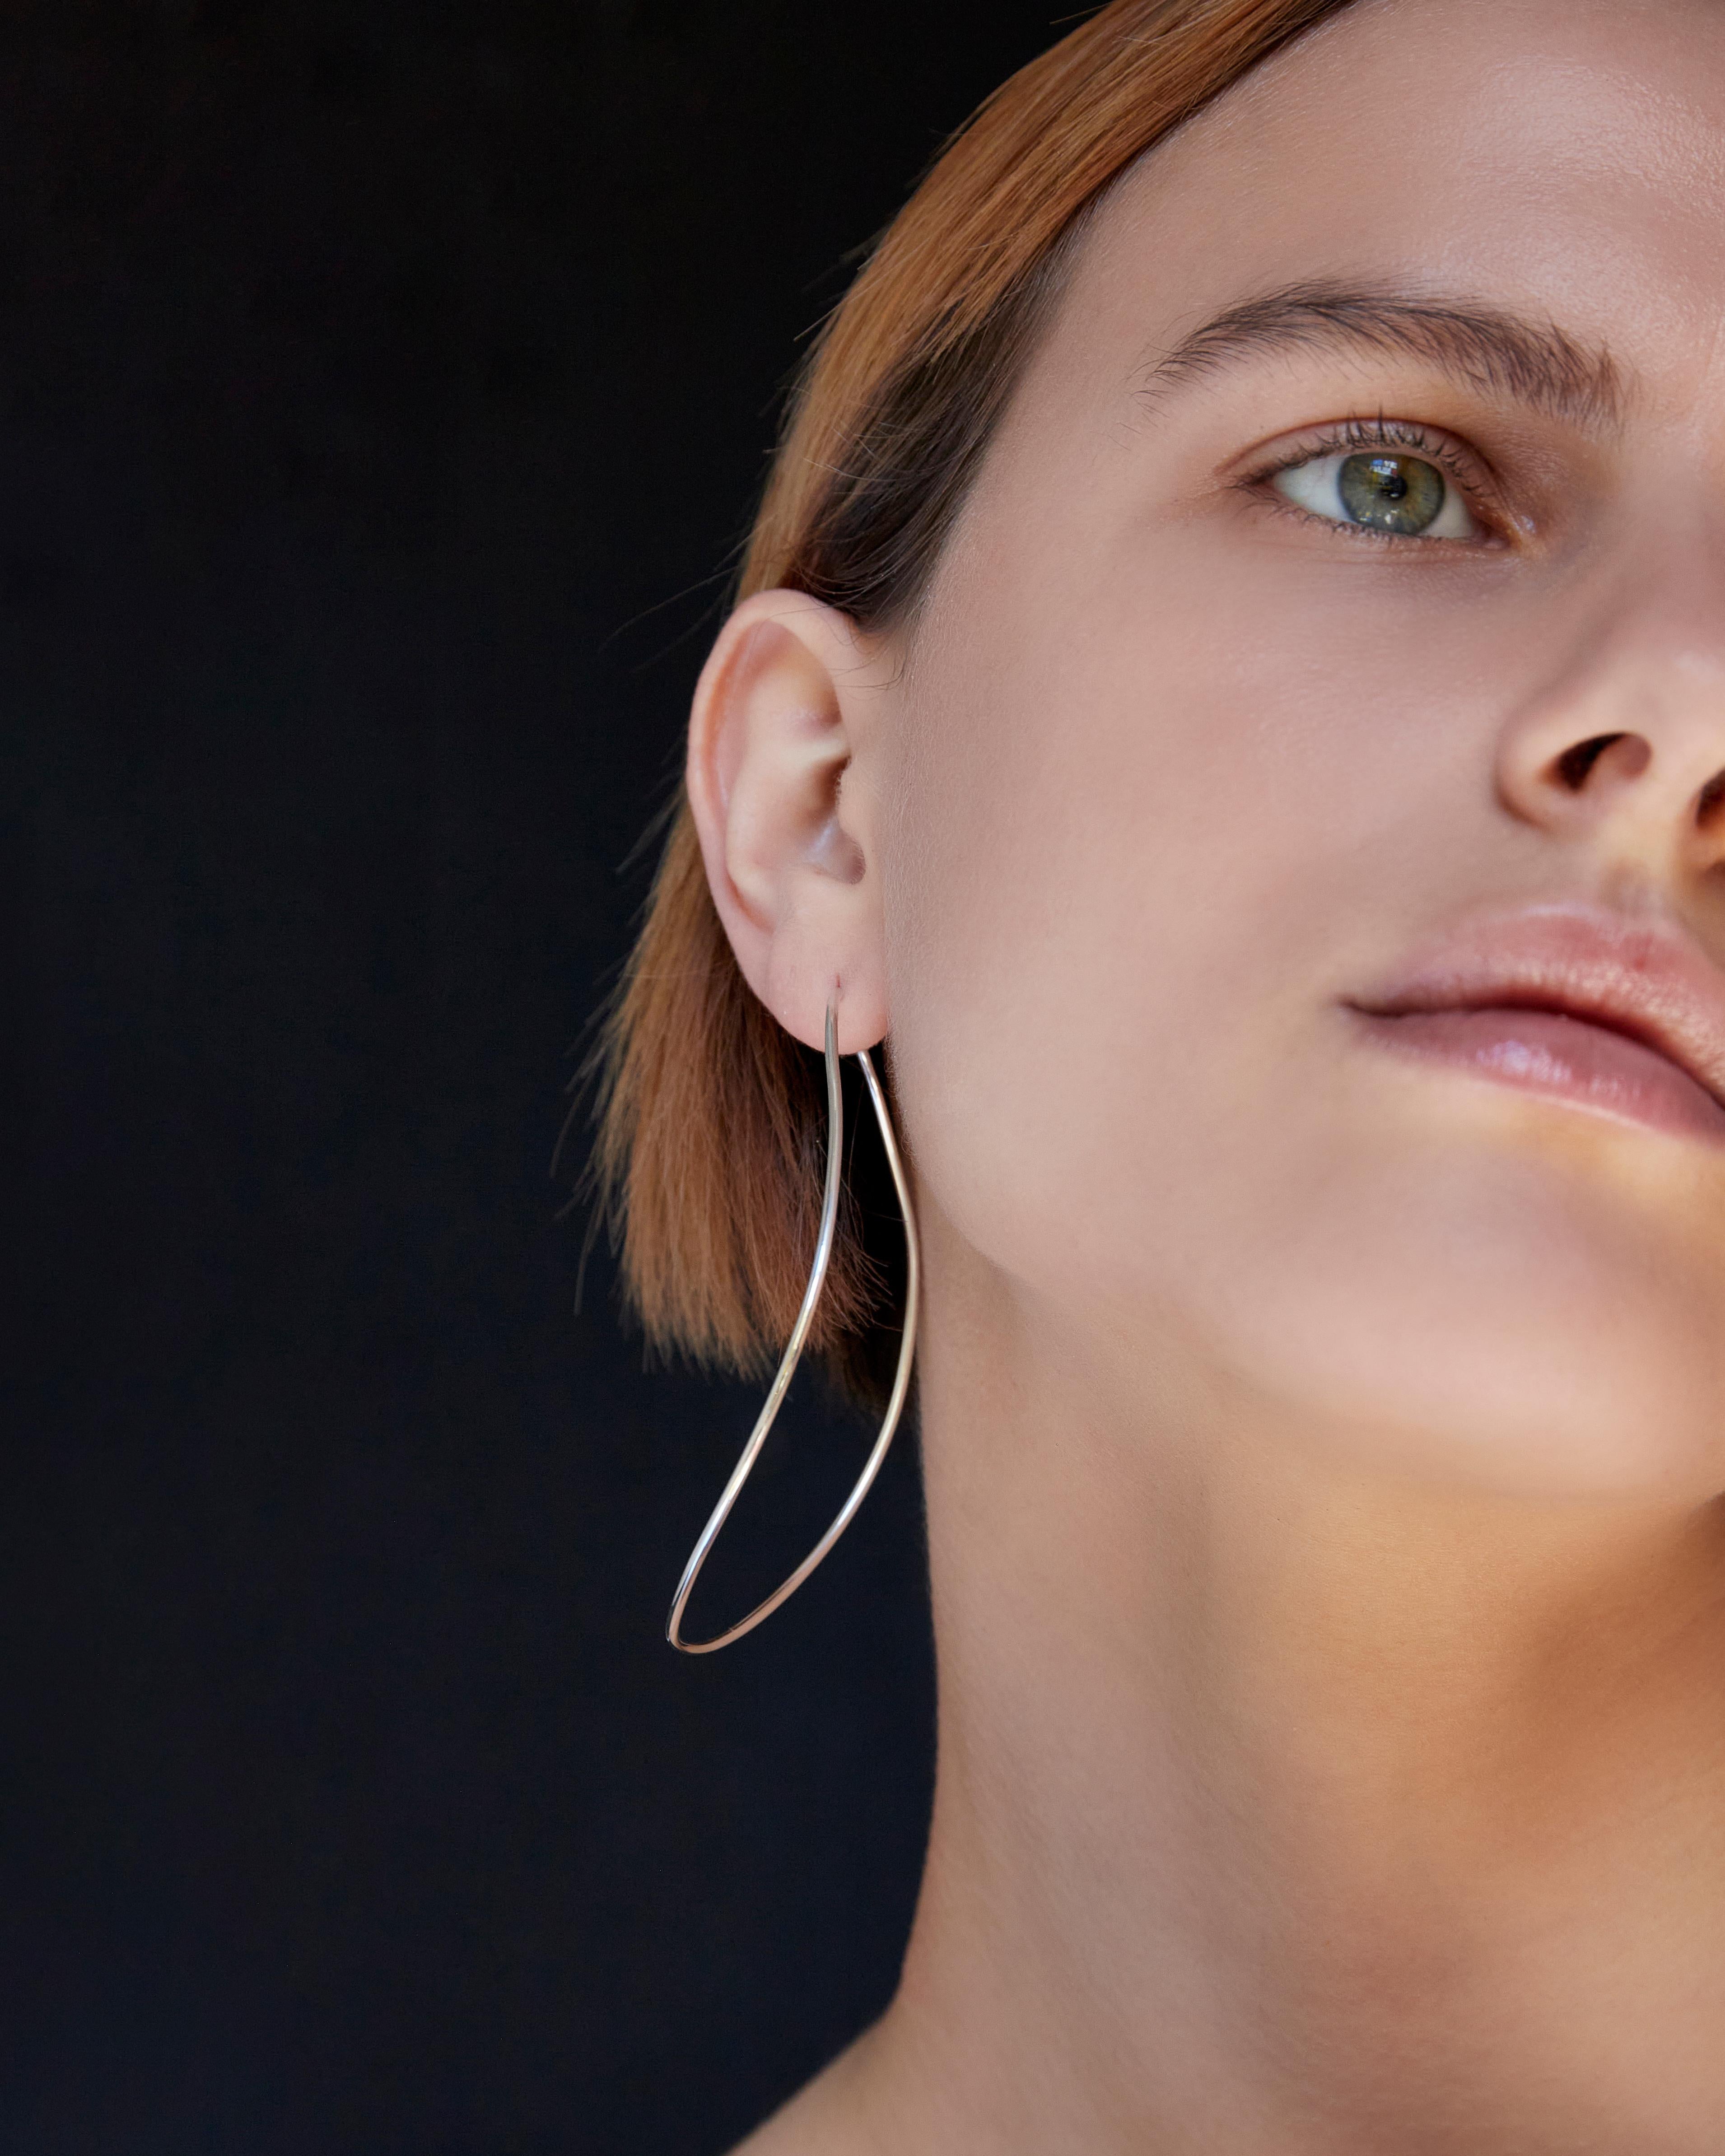 BAR Jewellery, London UK, SILHOUETTE EARRINGS, Sterling Silver 

The gentle curves of the Silhouette hoops are inspired by the work of Modernist artists such as Terry Frost and Barbara Hepworth, who worked in the British town of St Ives in the